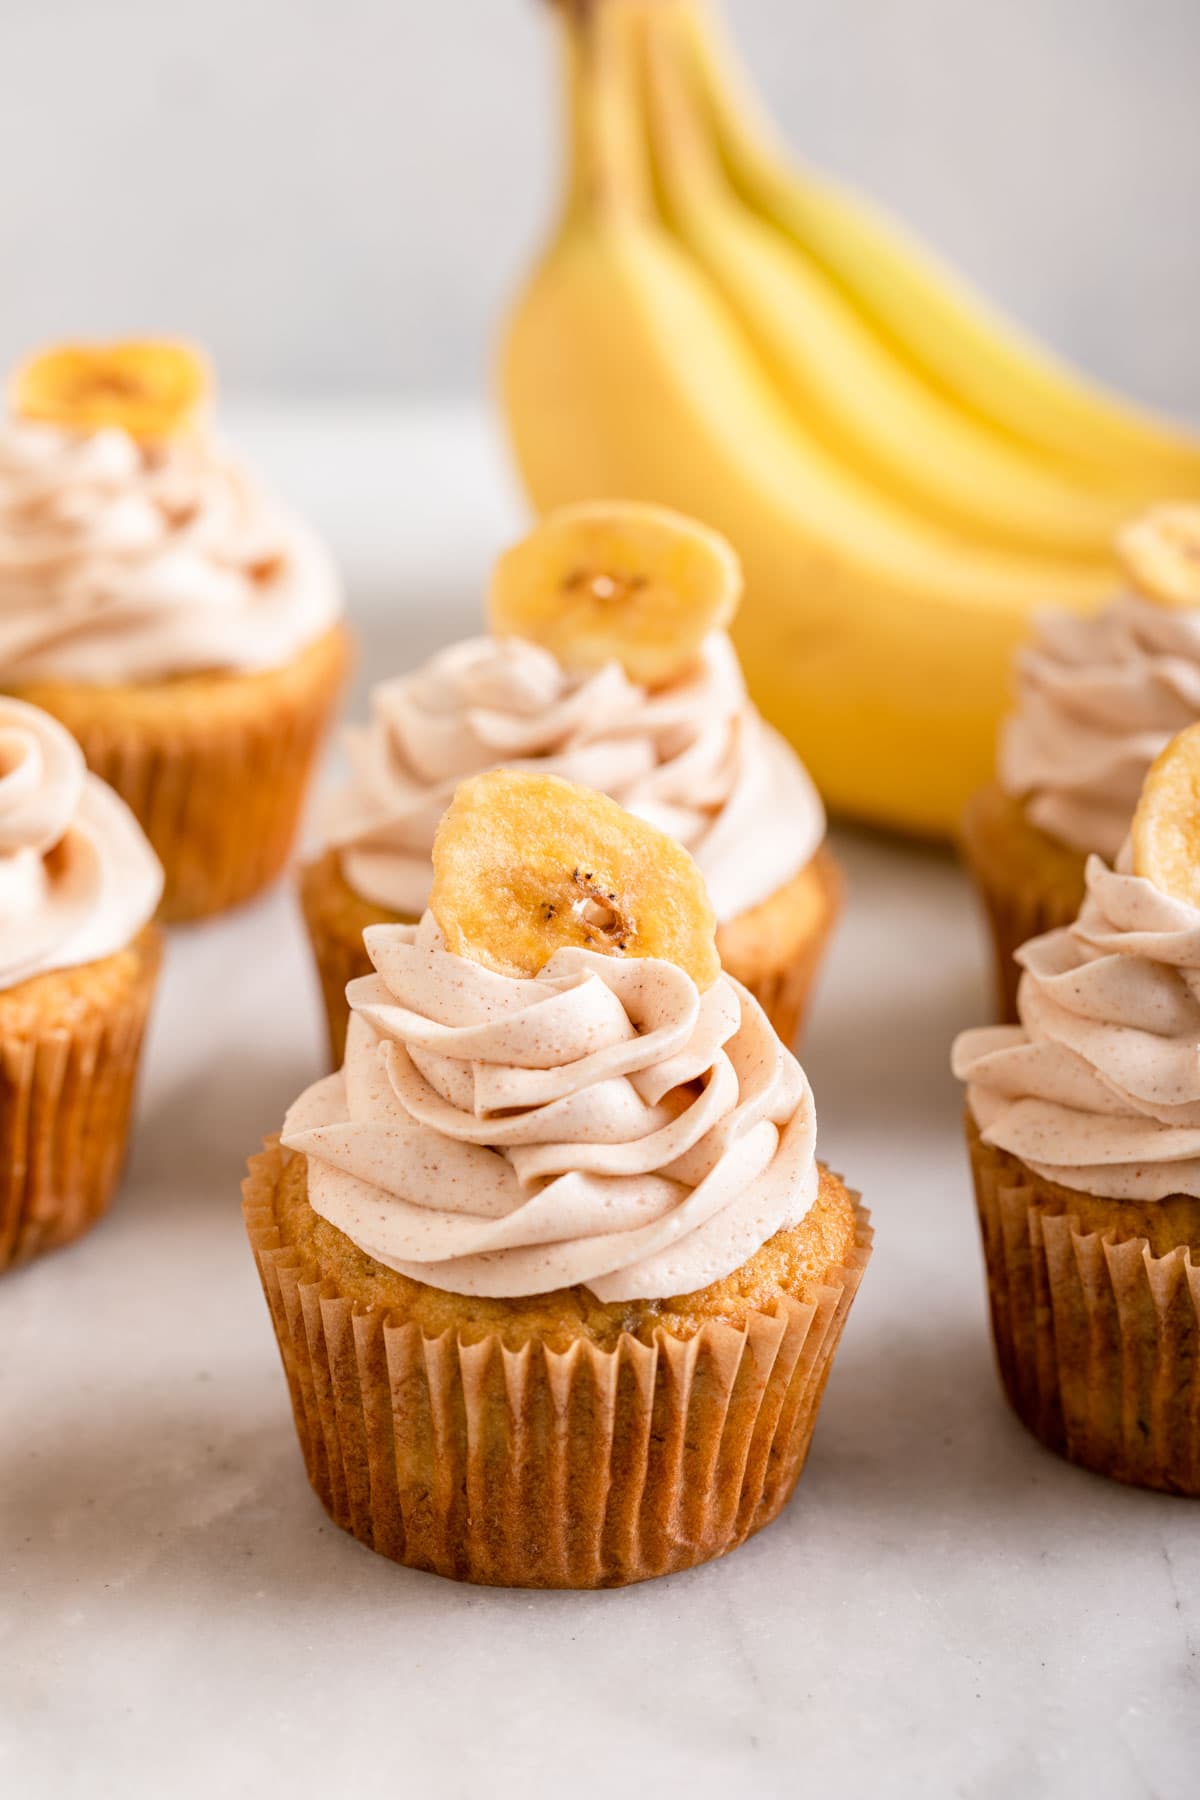 Banana Cupcakes frosted and lined up on white background with bananas bunch behind them